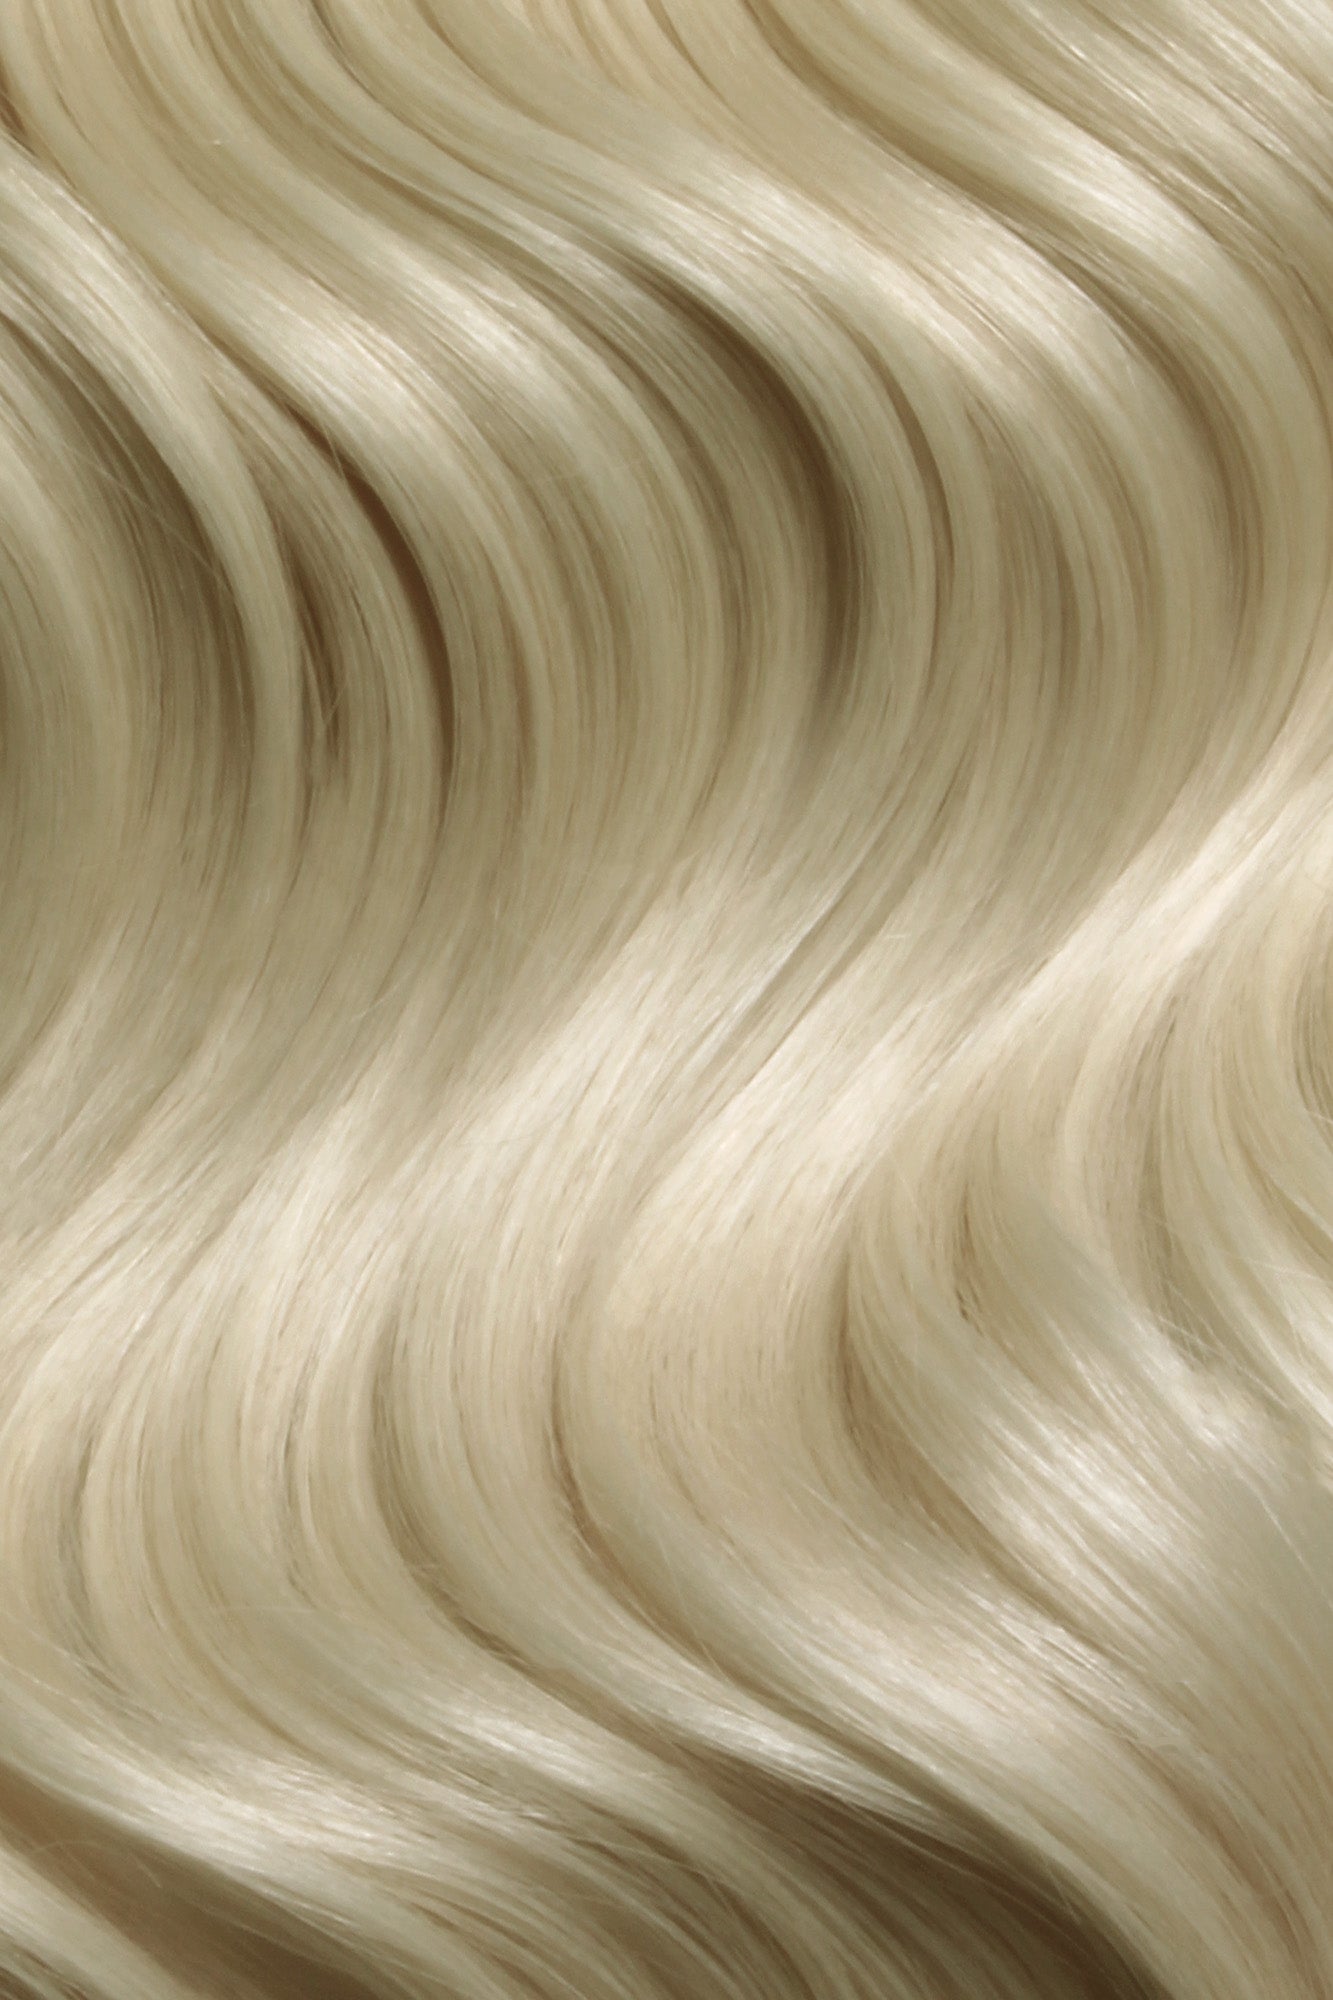 SEAMLESS® Flat Weft 16 Inches - SWAY Hair Extensions Sandy-Blonde-60 Natural SEAMLESS® Flat Weft 16 Inches extensions. Thin, flexible, and discreet. 100% Double Drawn Remy Human Hair. Versatile and reusable